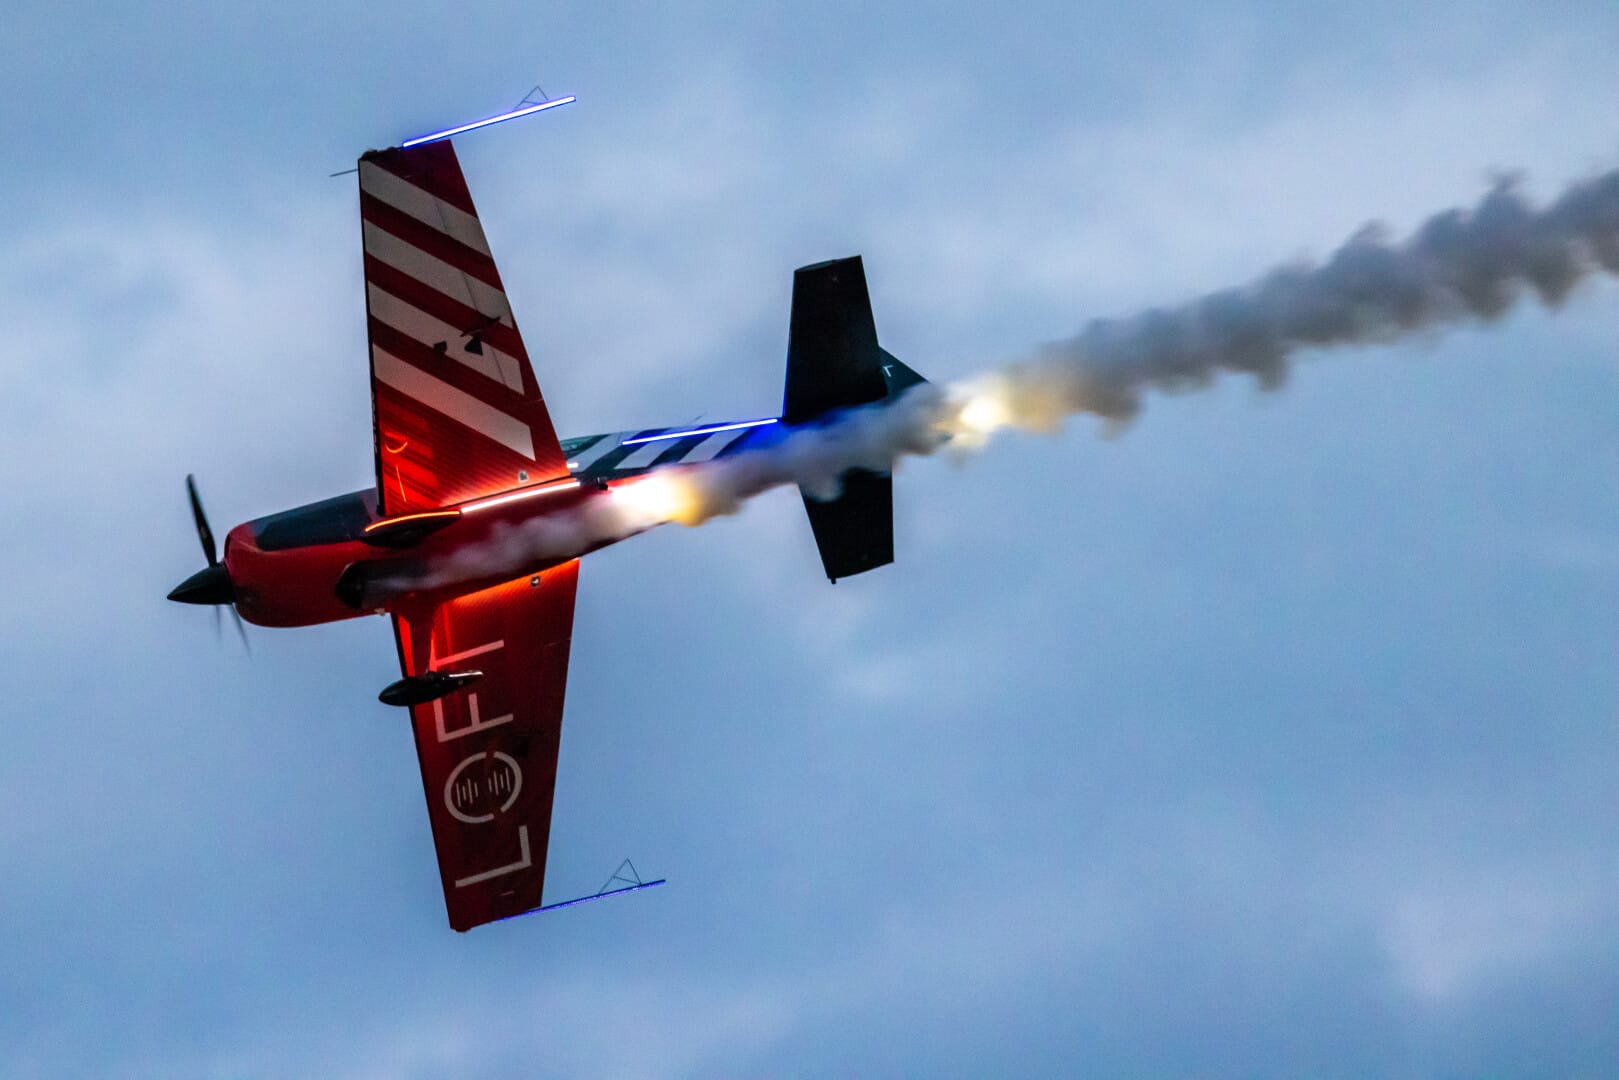 WATCH: A Nighttime Airshow with Fireworks Strapped to an Airplane